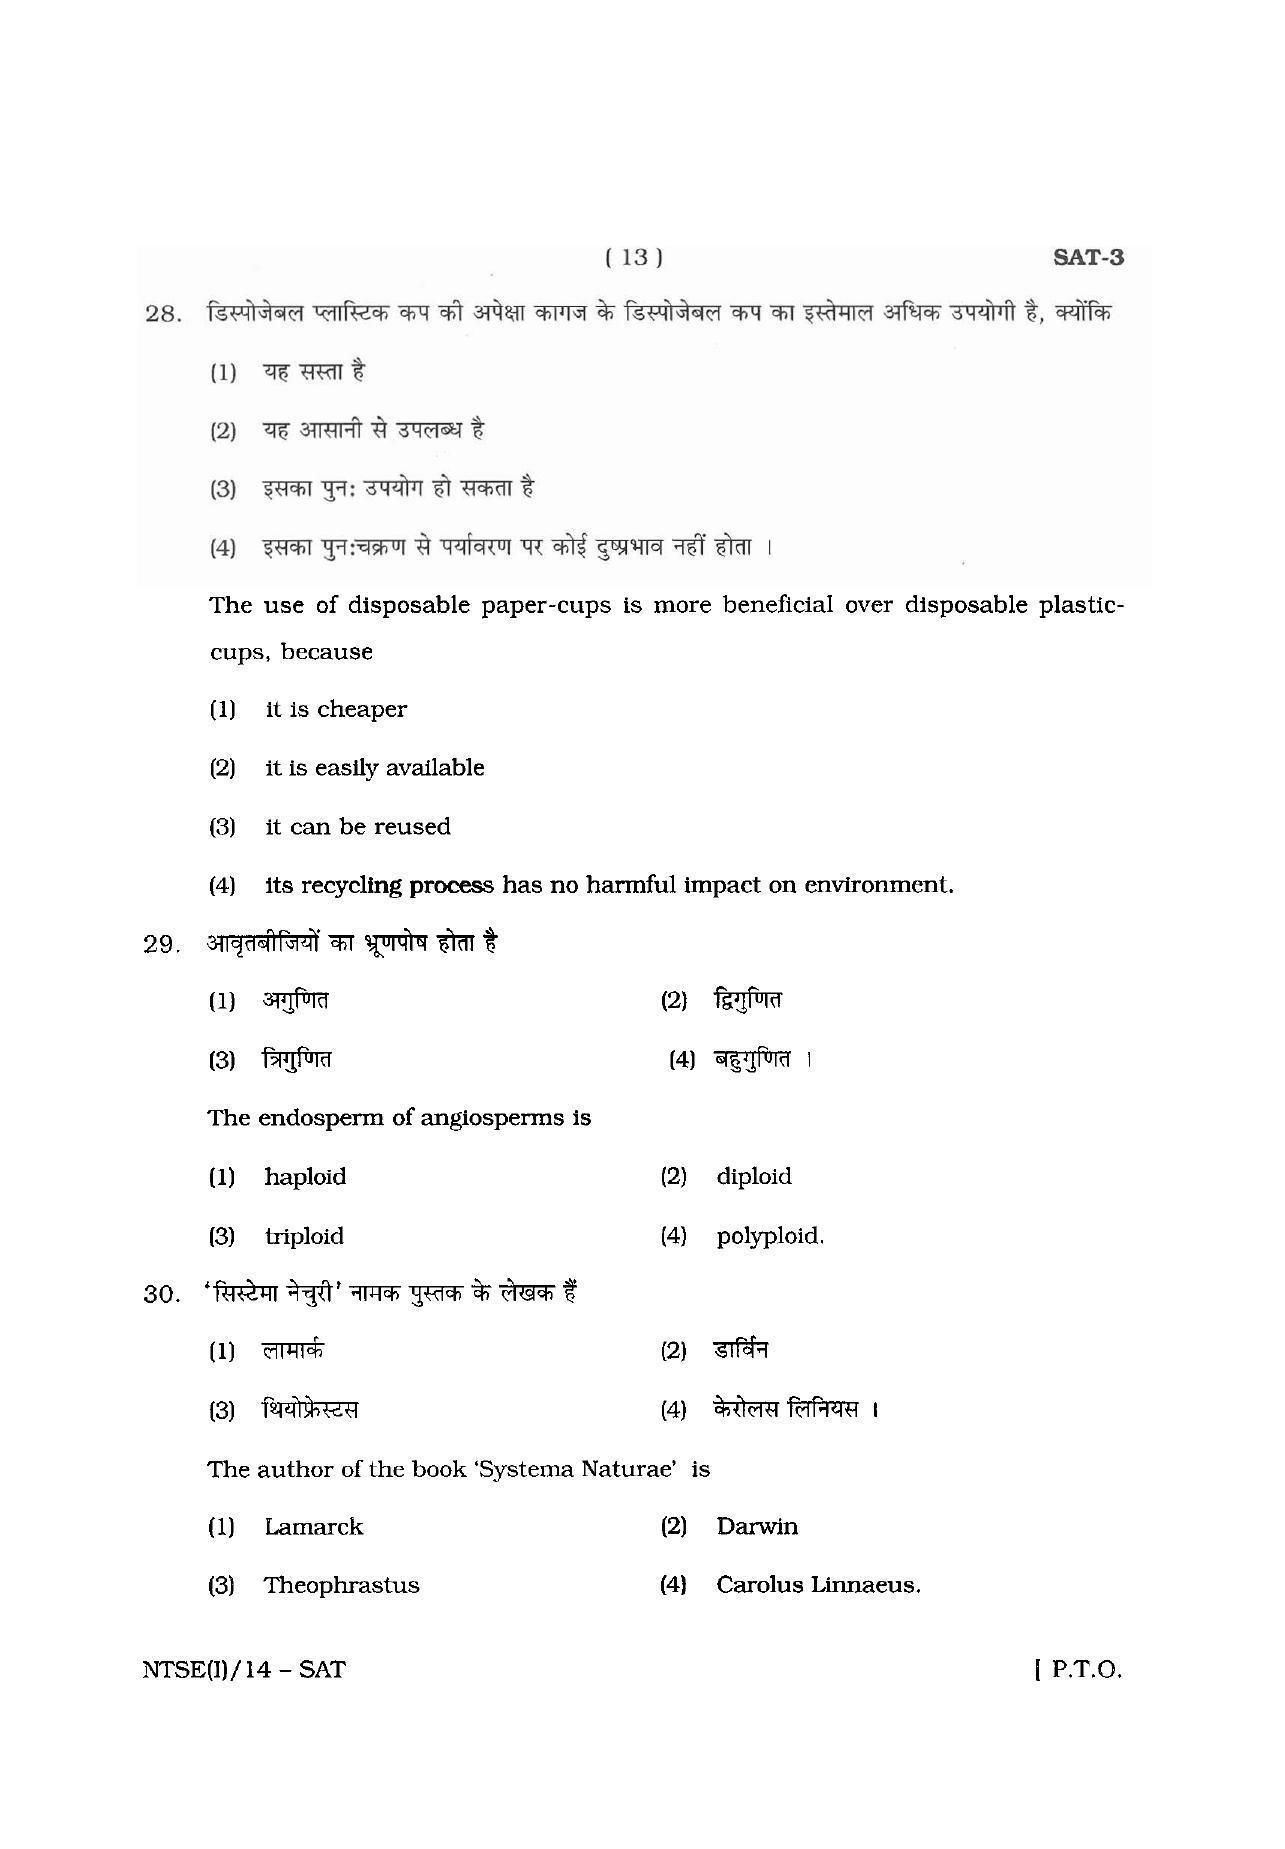 NTSE 2014 (Stage II) SAT Question Paper - Page 13